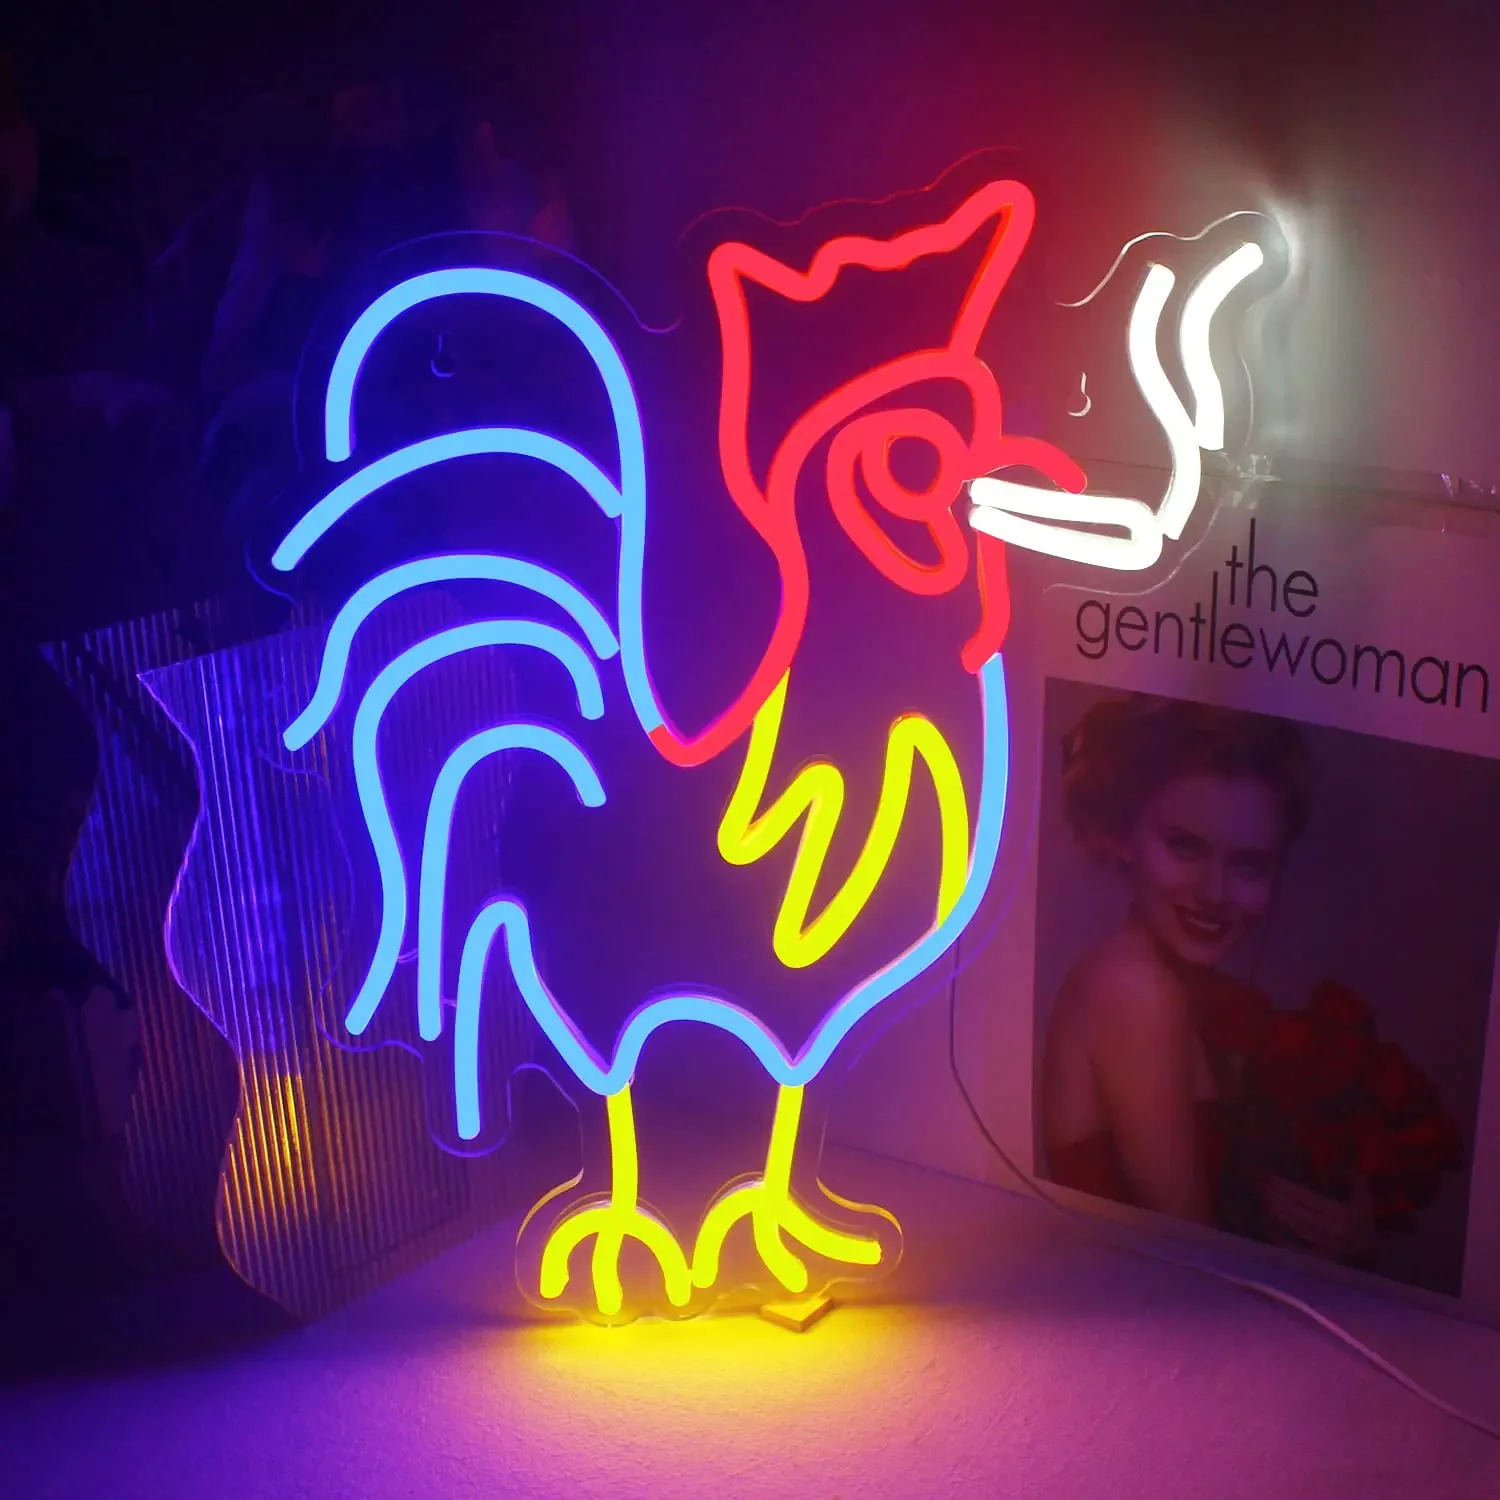 

LED Rooster Chicken Neon Sign Neon Lightsfor Wall Decor Animal Preppy Lights Room Decor Birthday Party Gift Decoration Aesthetic